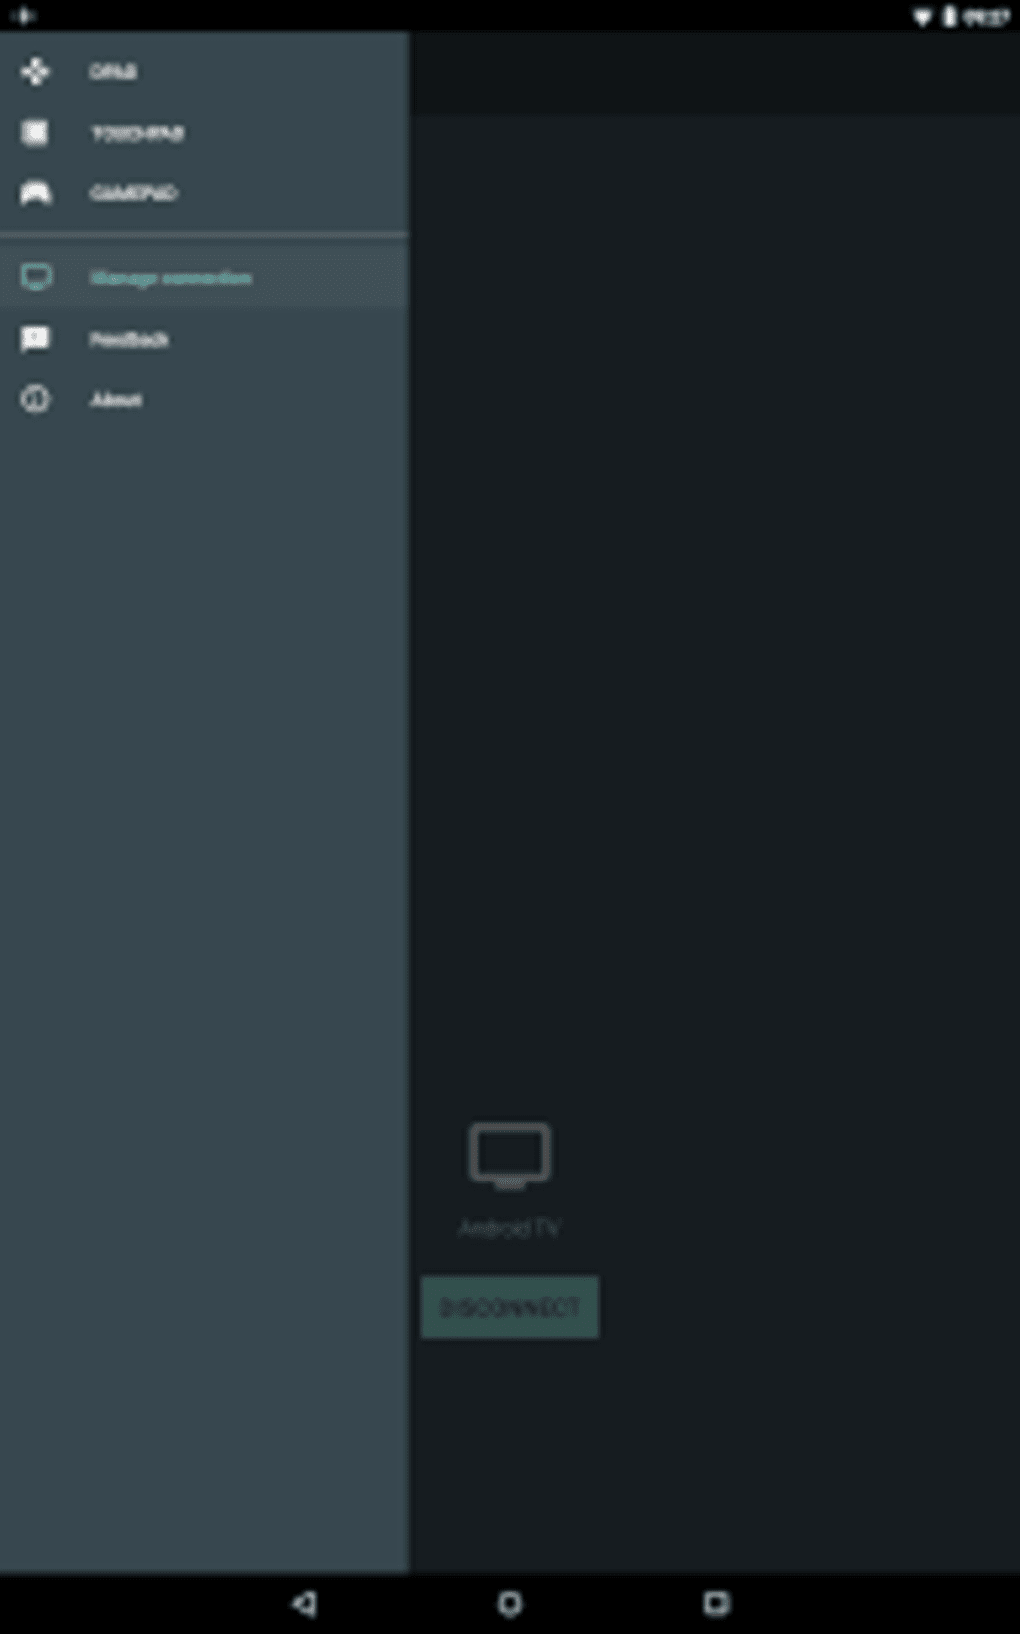 android tv remote control screenshot